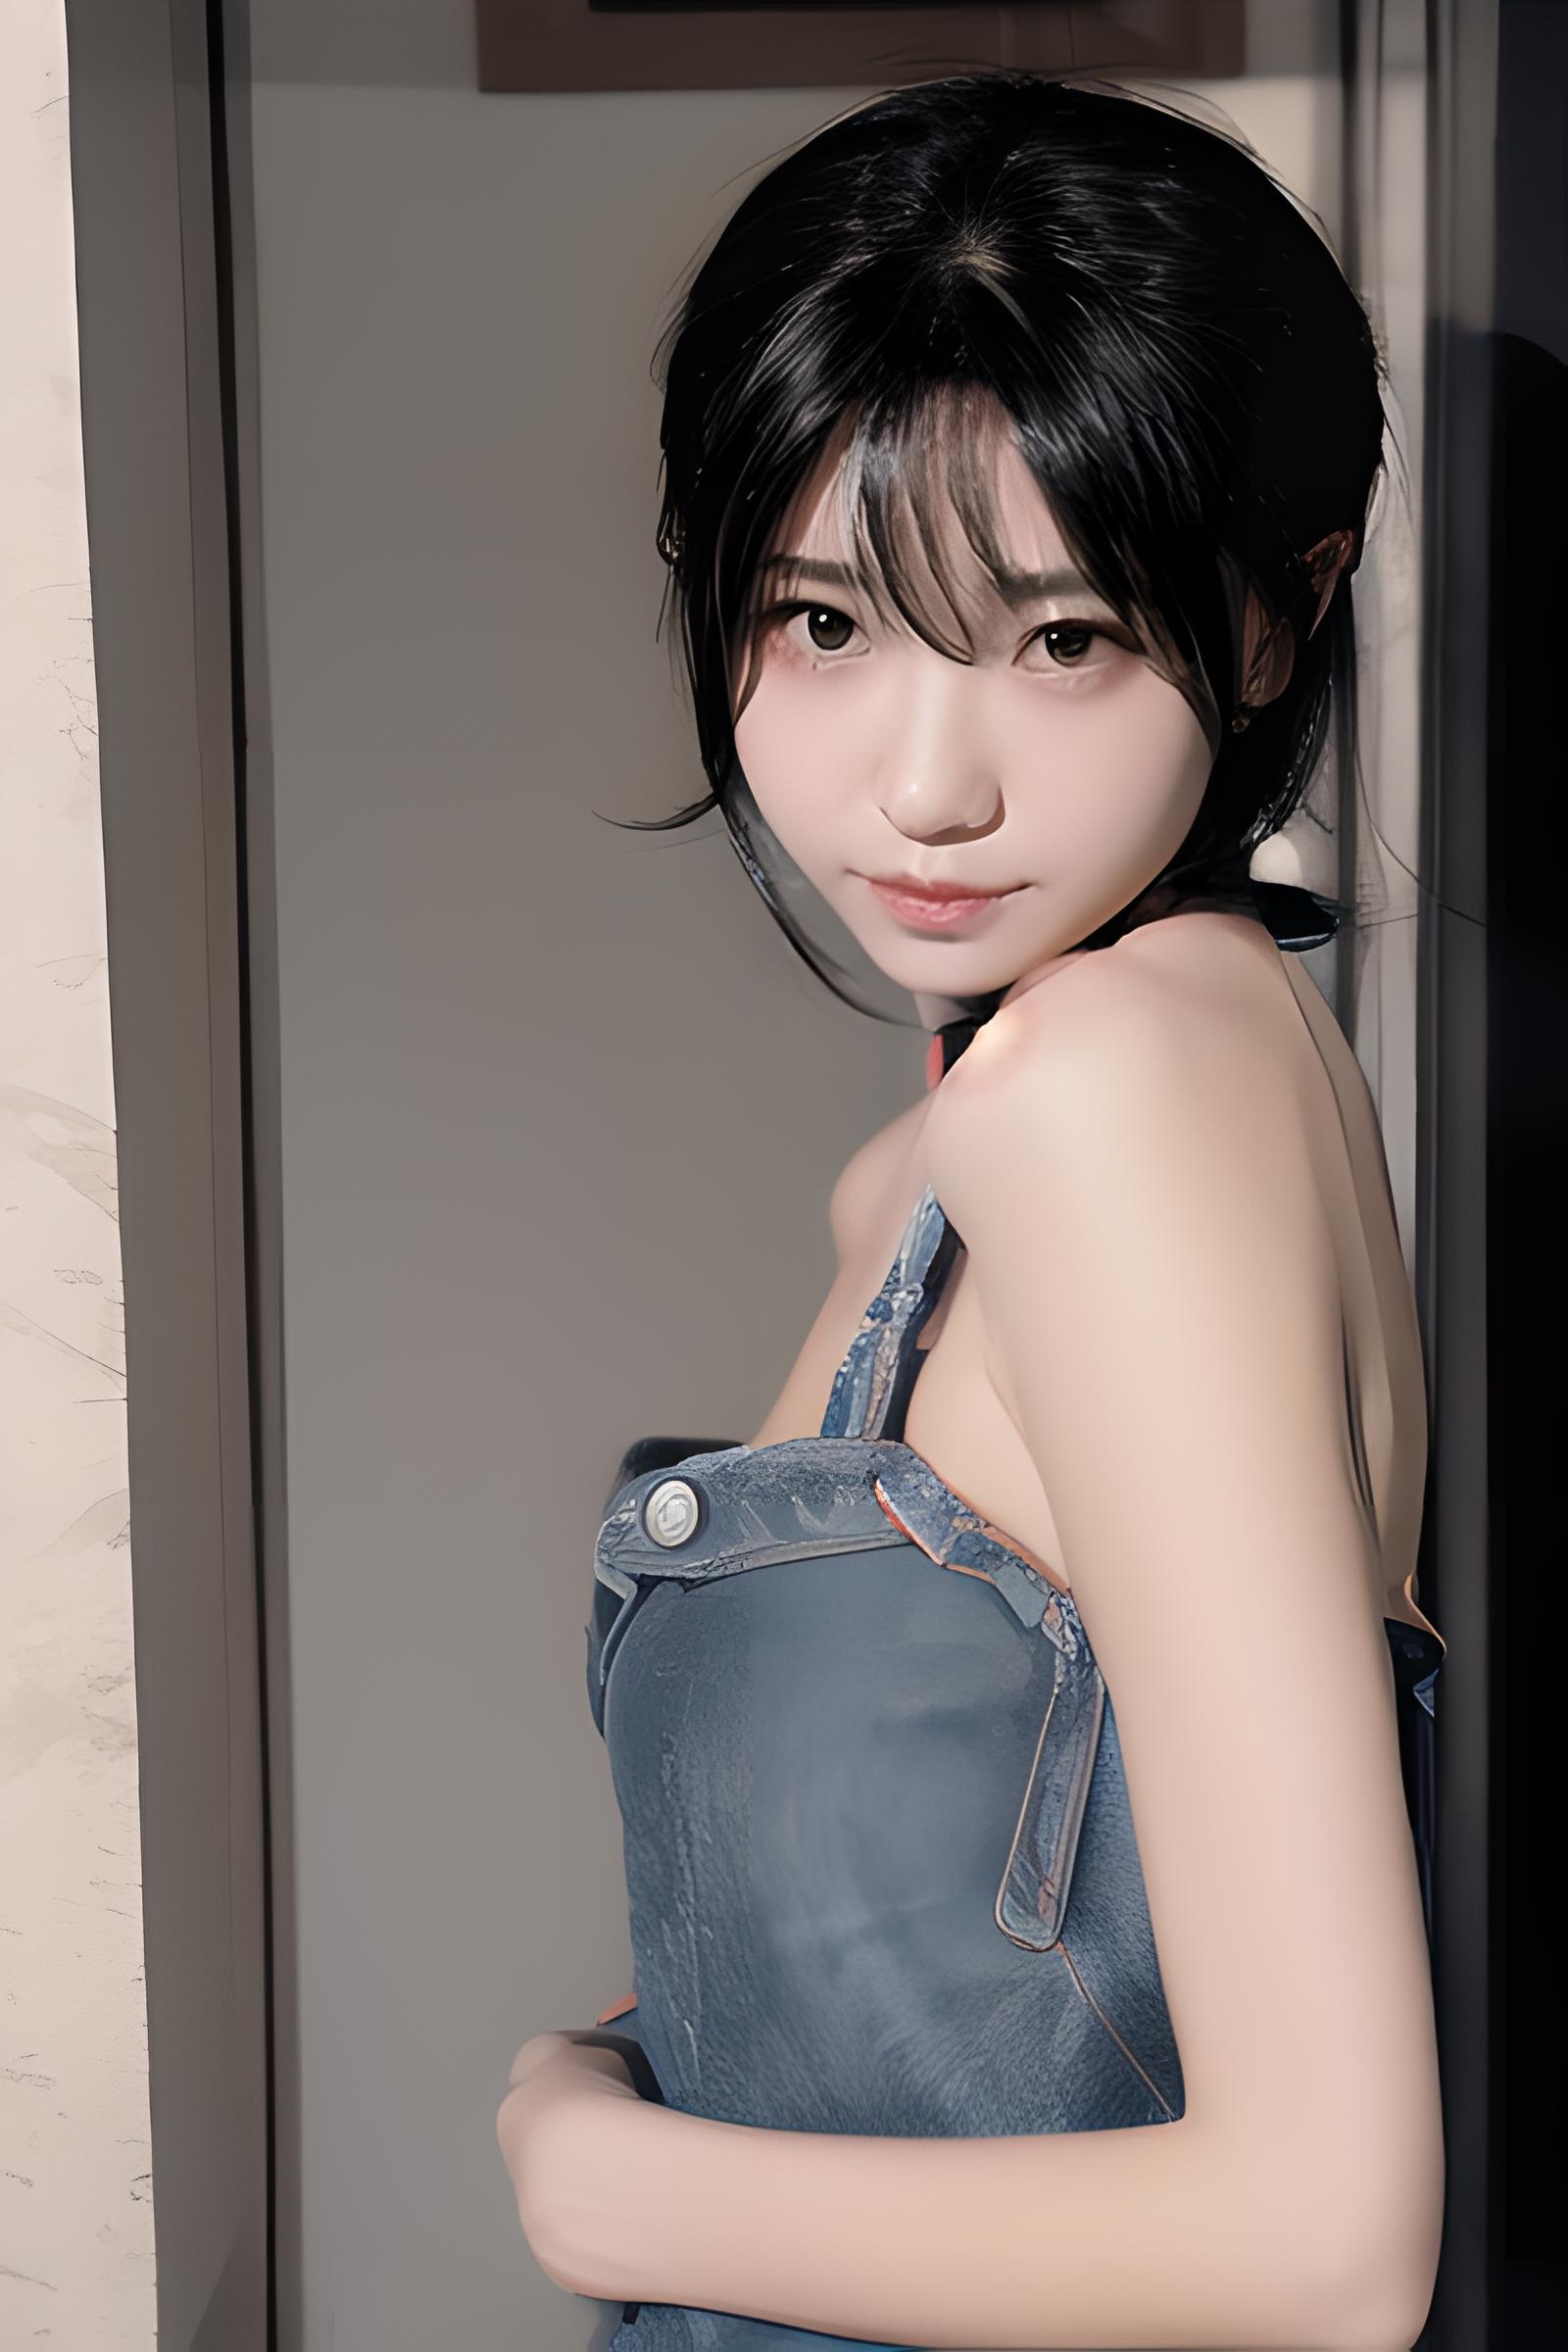 AI model image by H299800